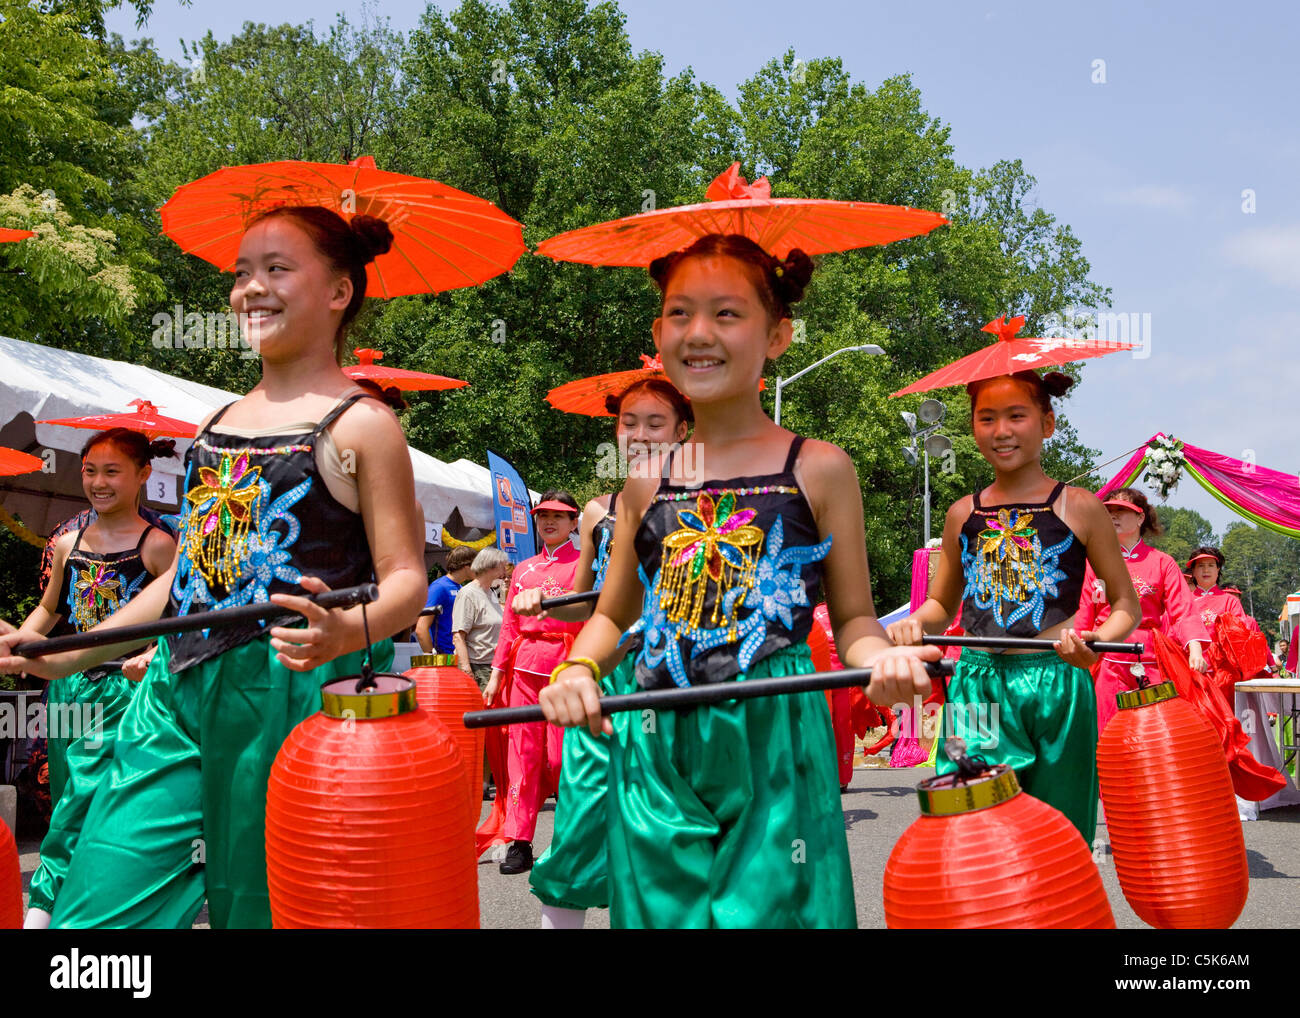 Young Chinese girls carrying paper lanterns and wearing paper parasols in a parade Stock Photo